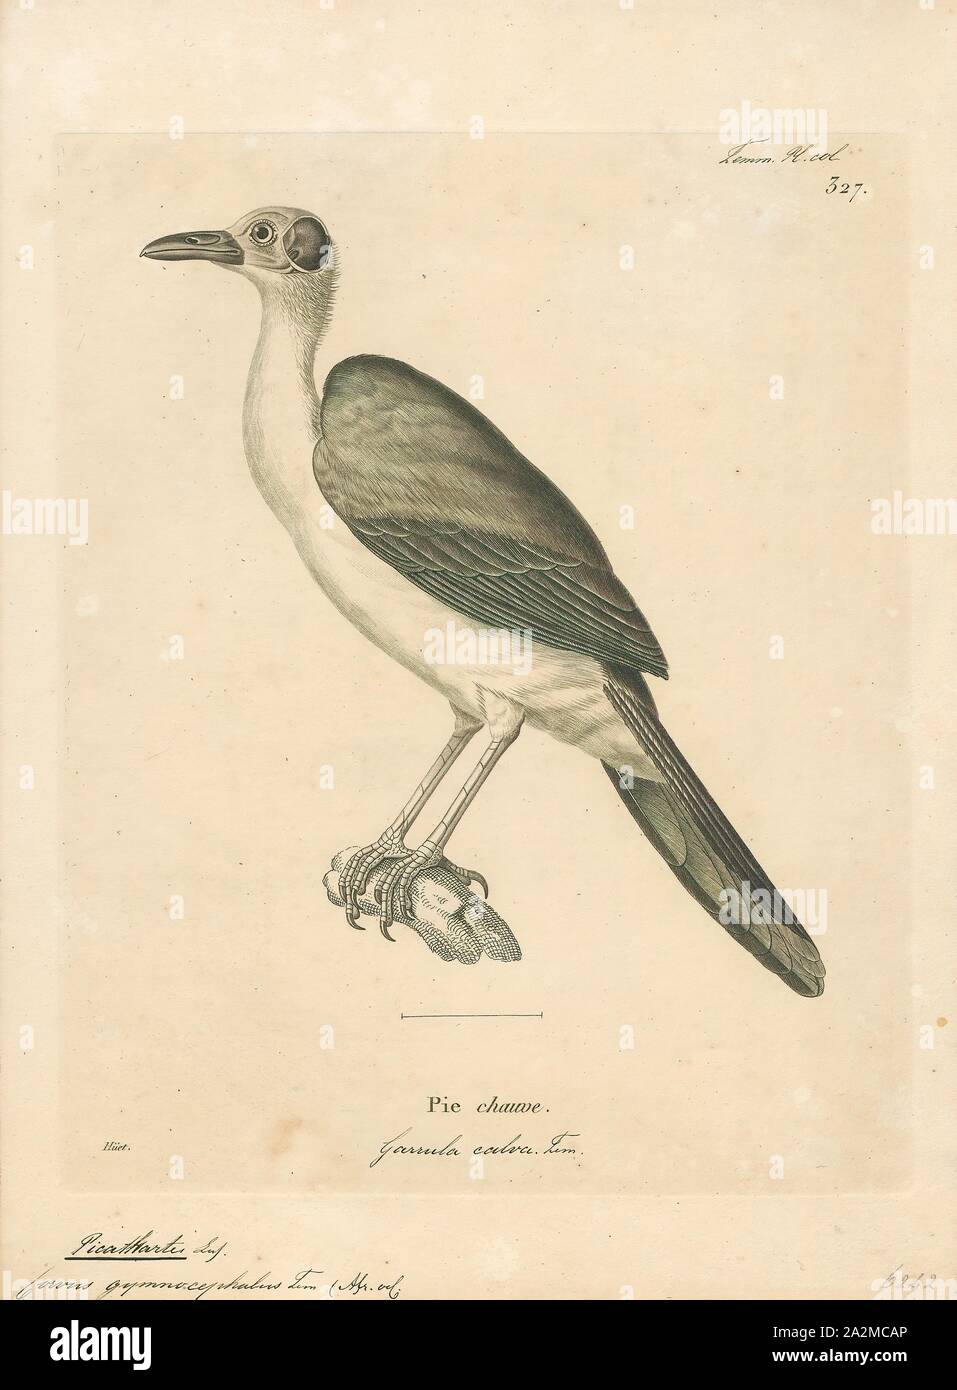 Corvus gymnocephalus, Print, The white-necked rockfowl (Picathartes gymnocephalus) is a medium-sized bird in the family Picathartidae, with a long neck and tail. Also known as the white-necked picathartes, this passerine is mainly found in rocky forested areas at higher altitudes in West Africa from Guinea to Ghana. Its distribution is patchy, with populations often being isolated from each other. The rockfowl typically chooses to live near streams and inselbergs. It has no recognized subspecies, though some believe that it forms a superspecies with the grey-necked rockfowl. The white-necked Stock Photo